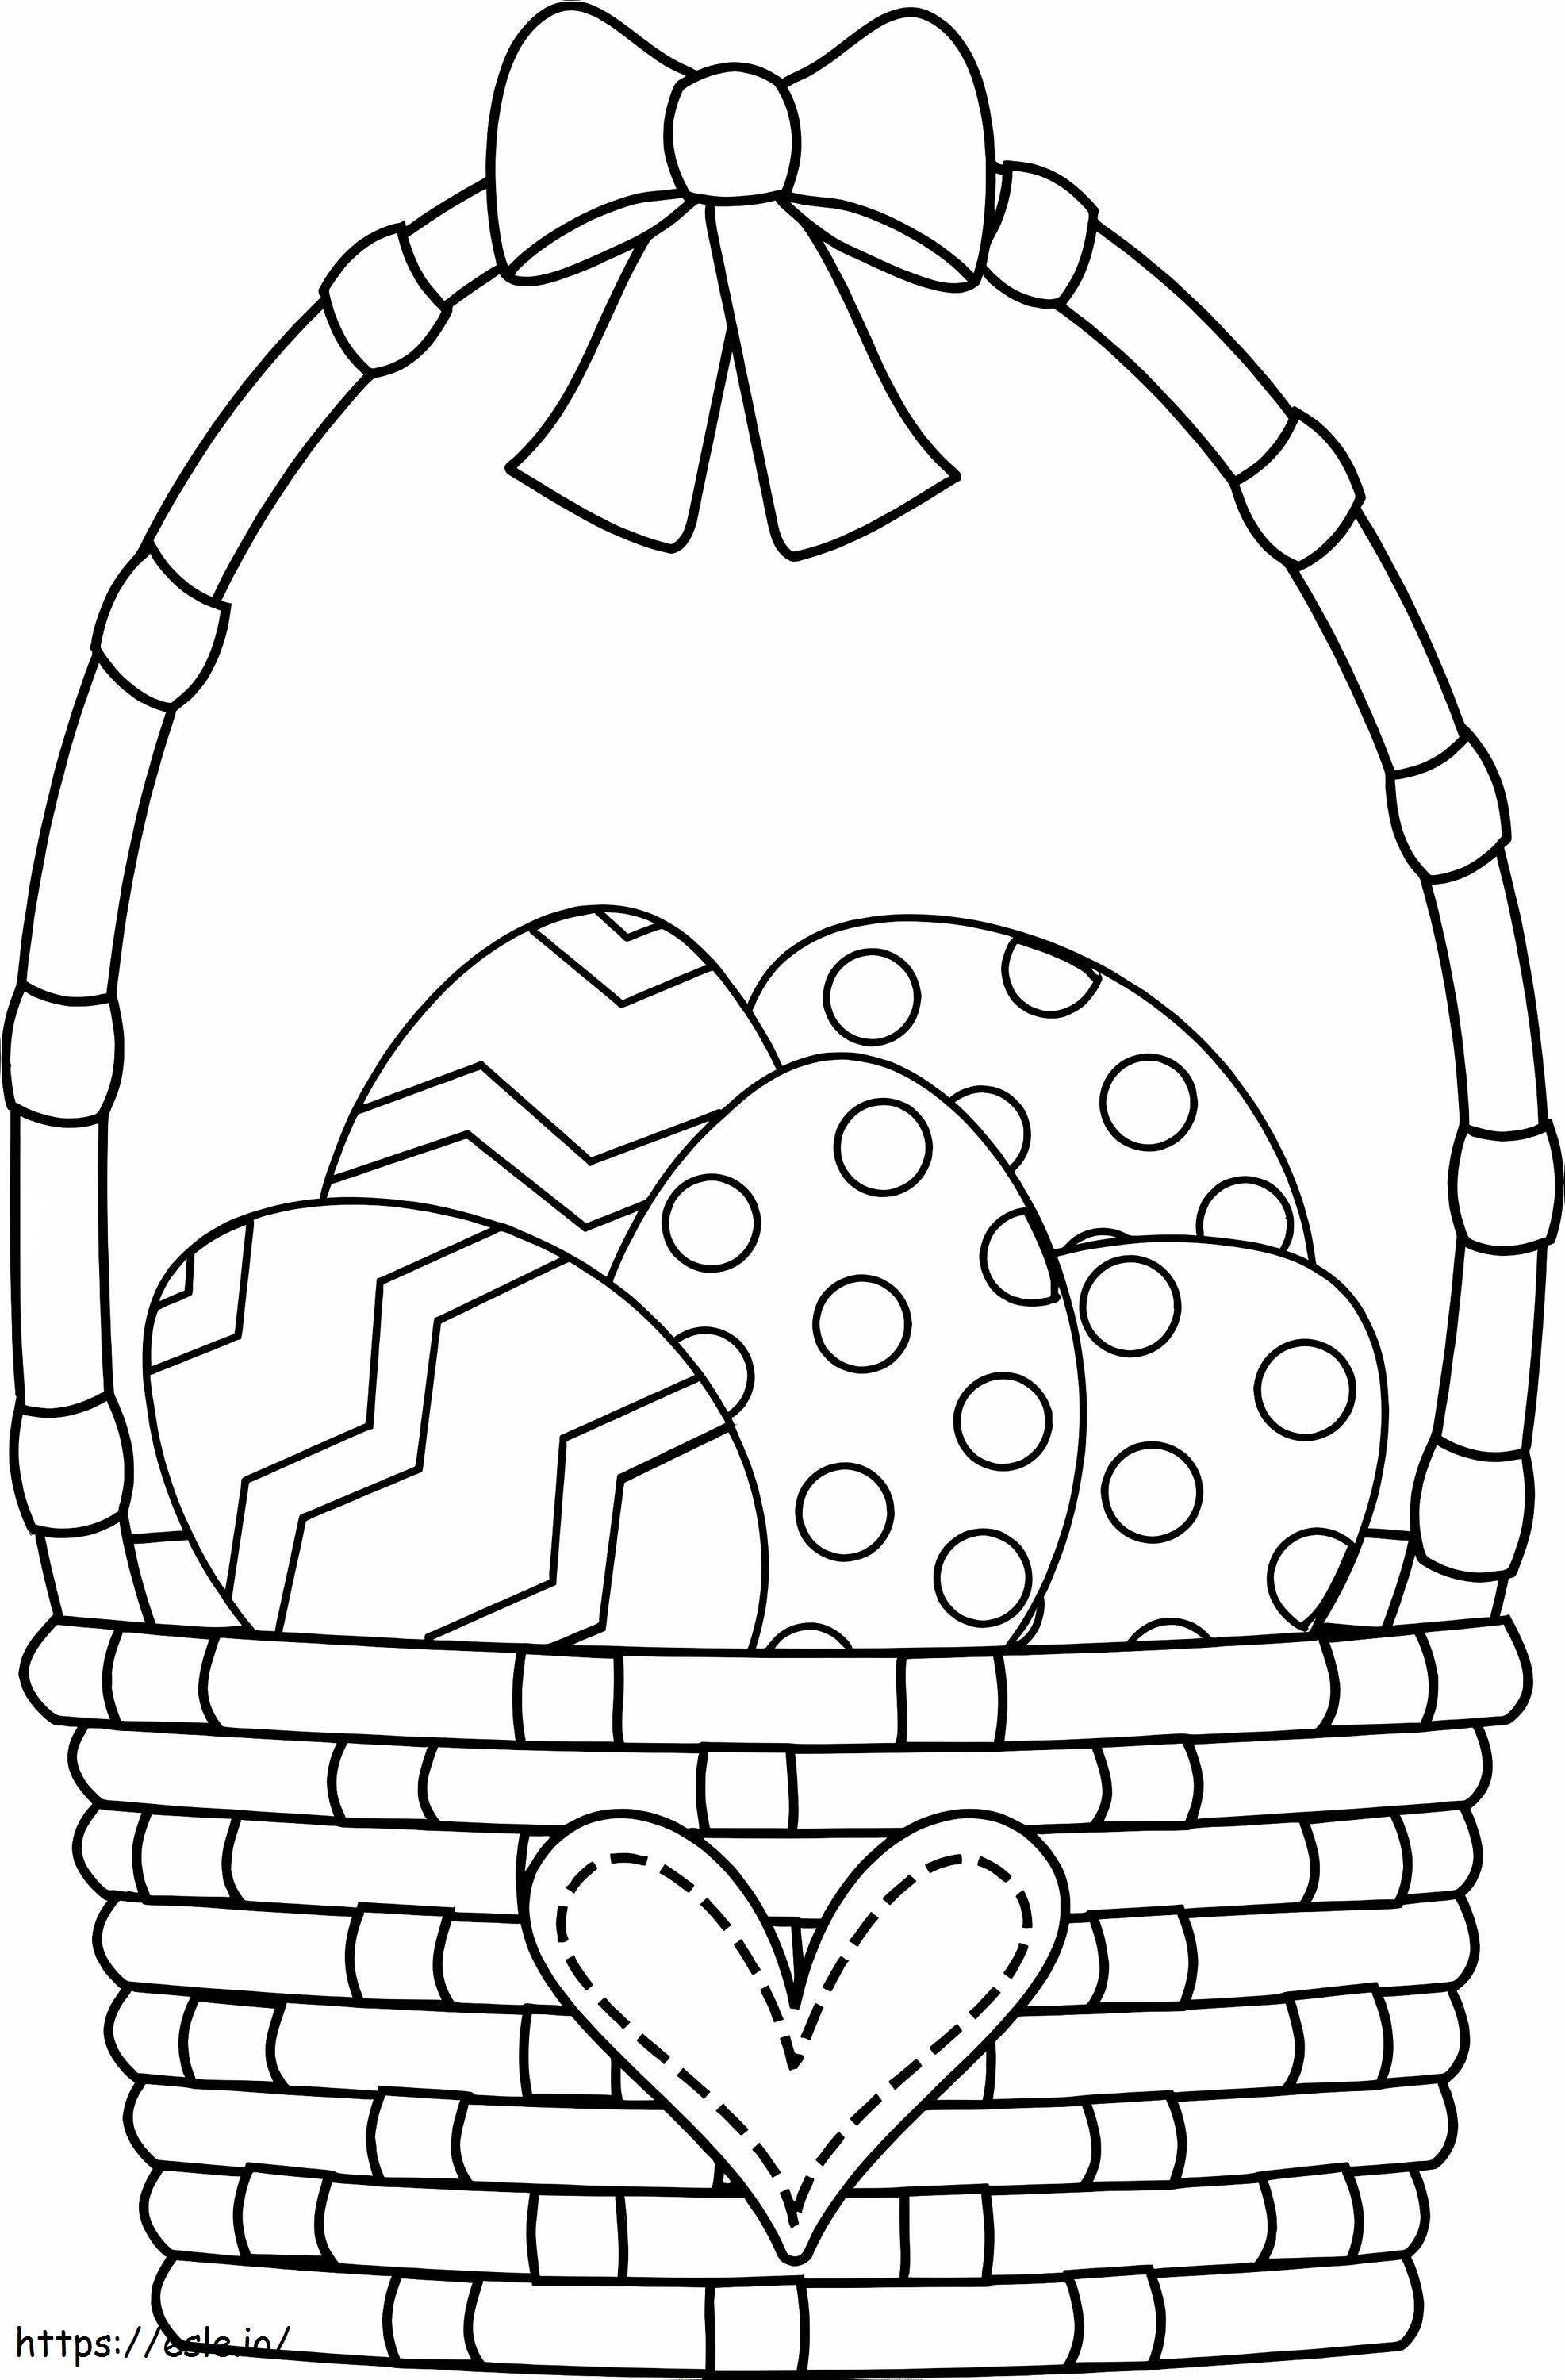 Lovely Easter Basket coloring page